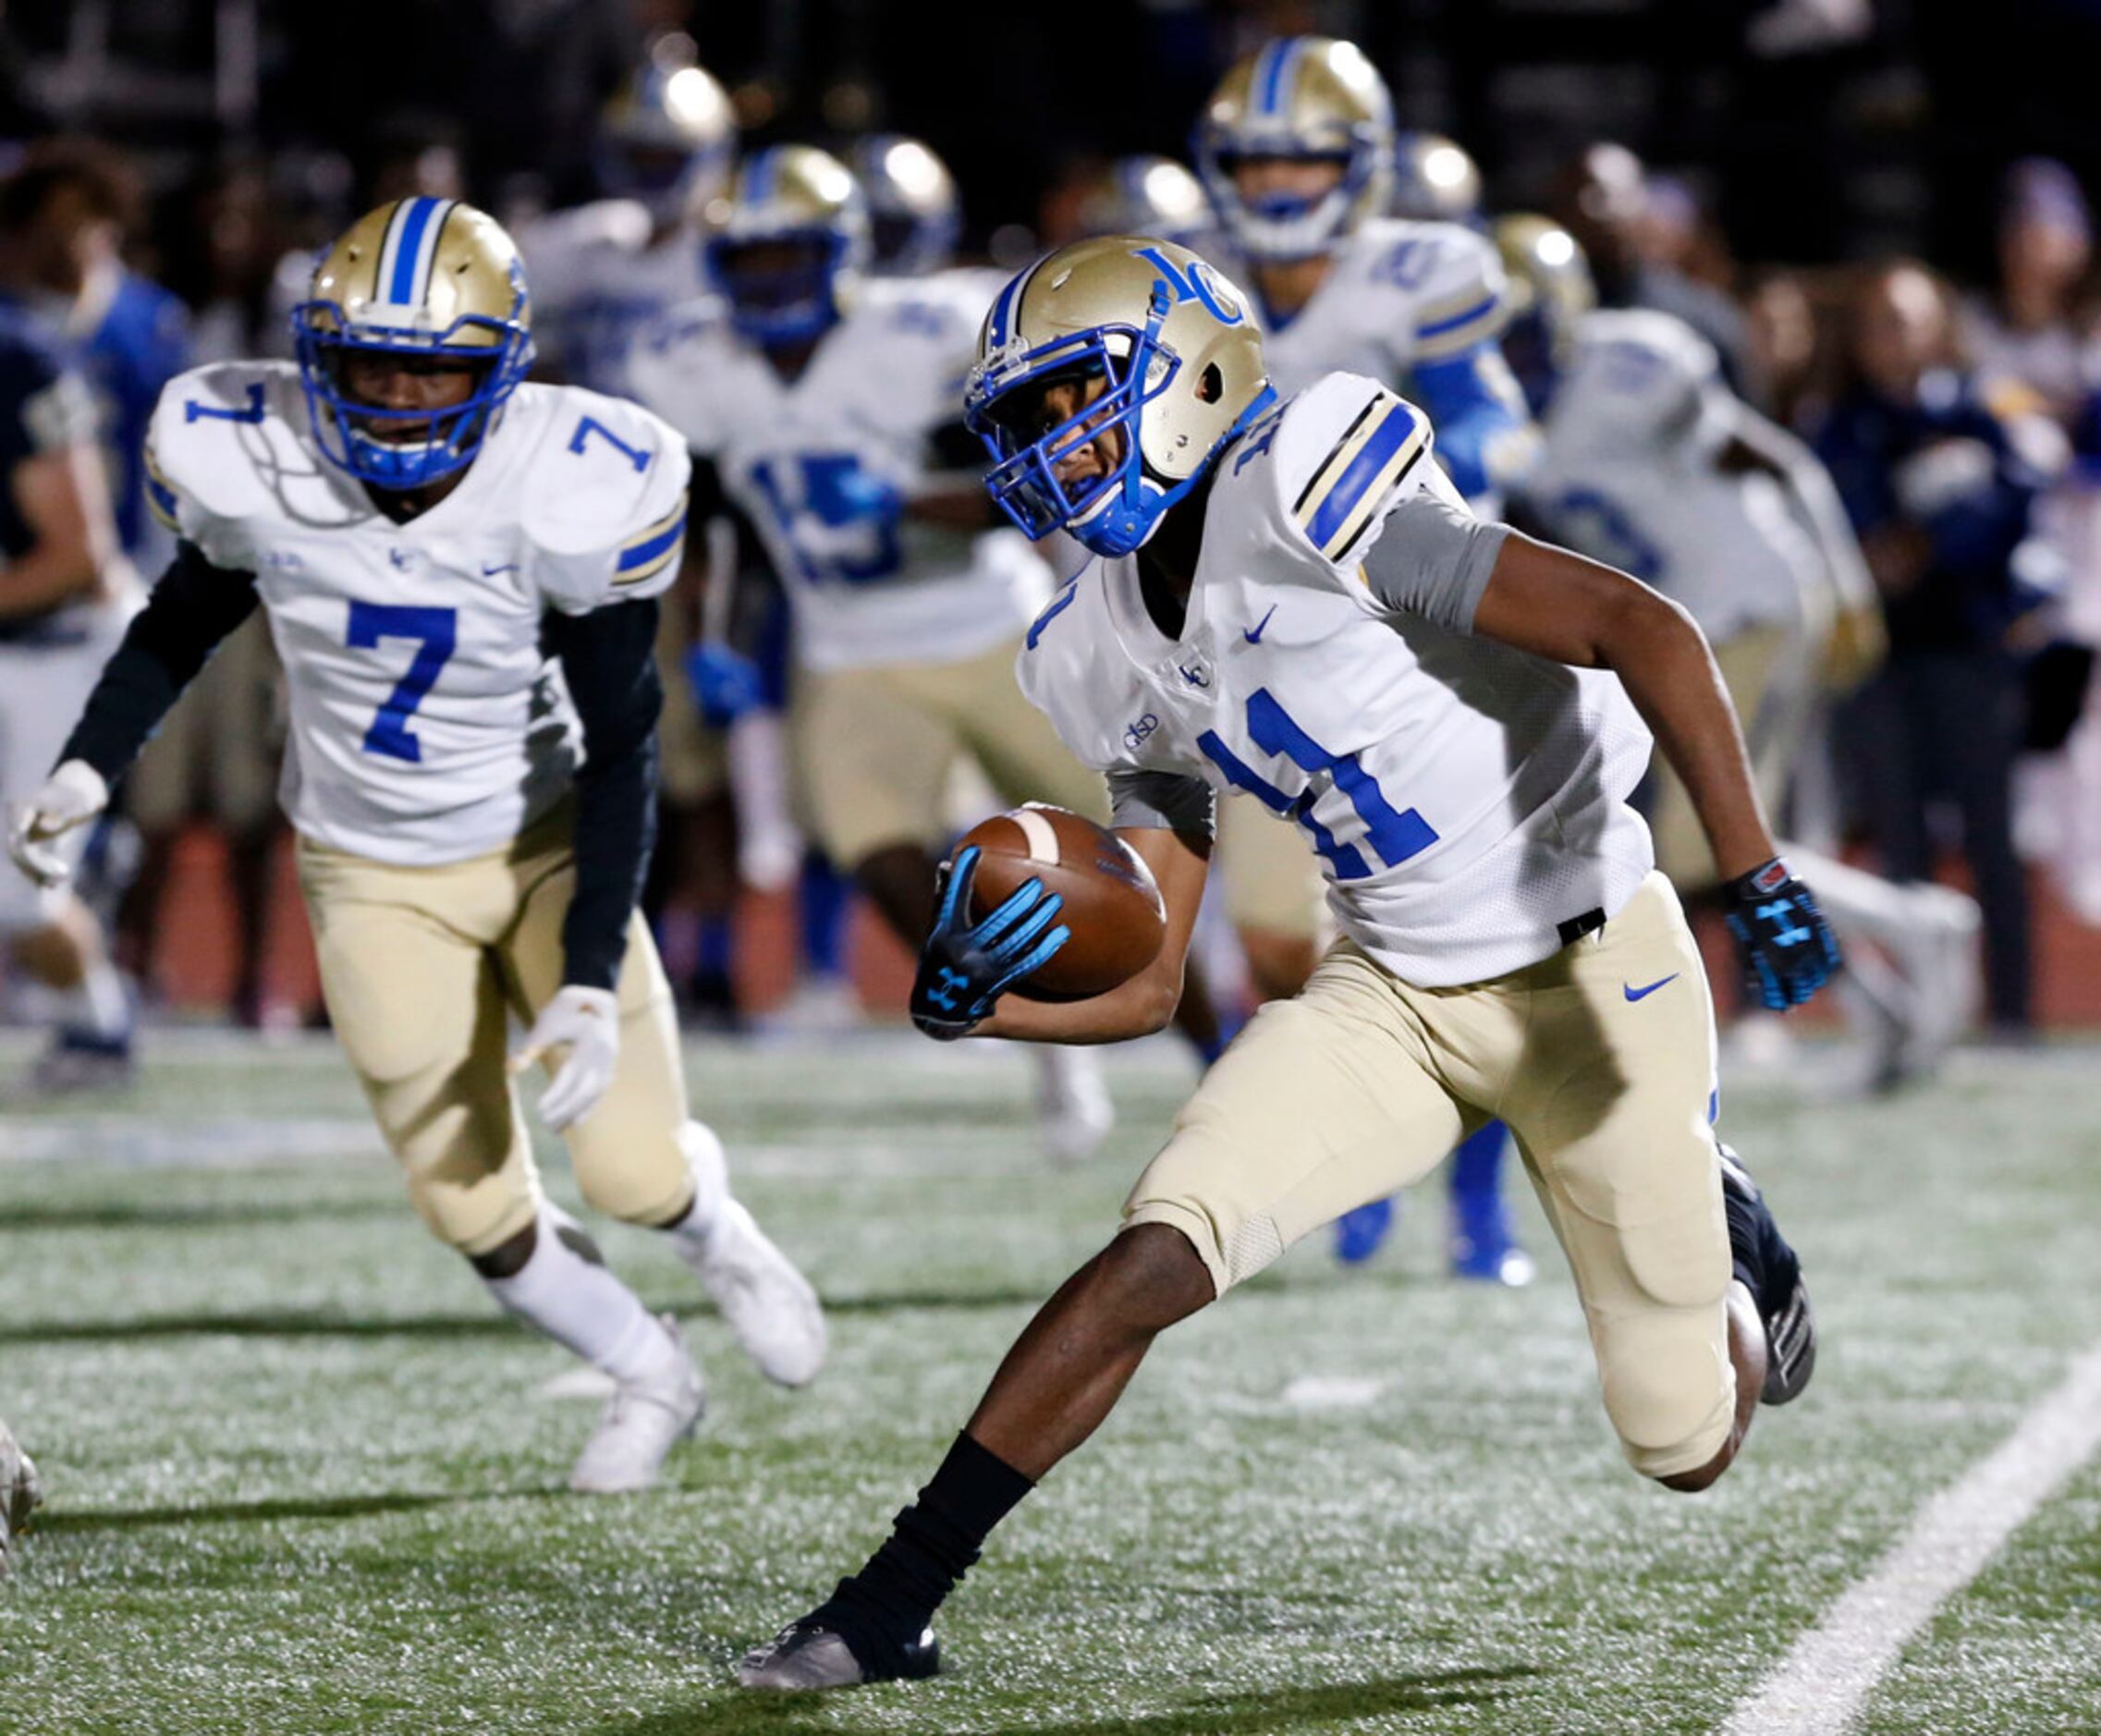 Lakeview's Garnett Burke (11) looks for an opening during the first half of the Lakeview...